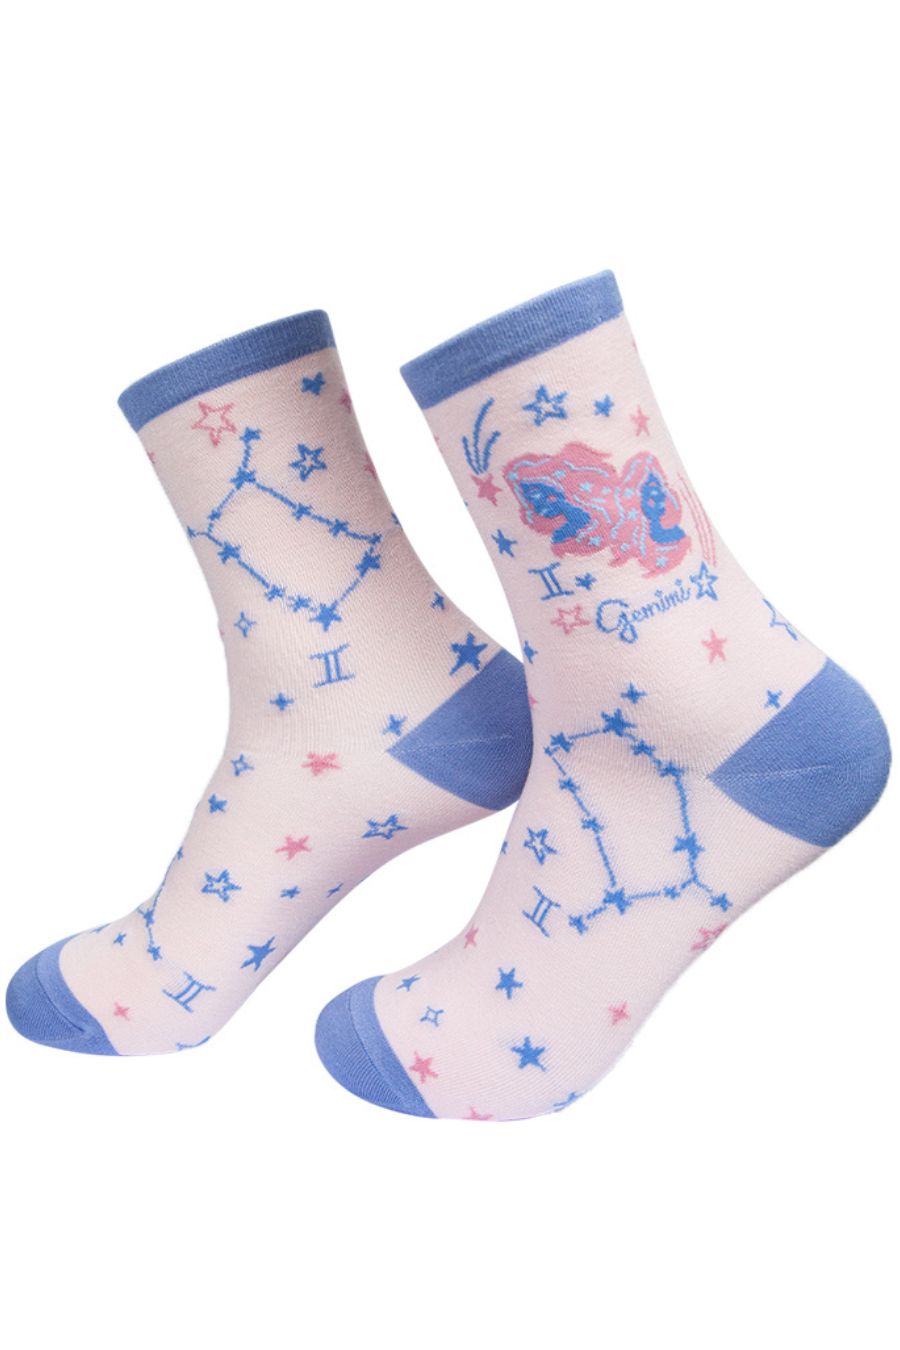 pink, lilac bamboo socks showing the star sign gemini and it's celestial constellation pattern